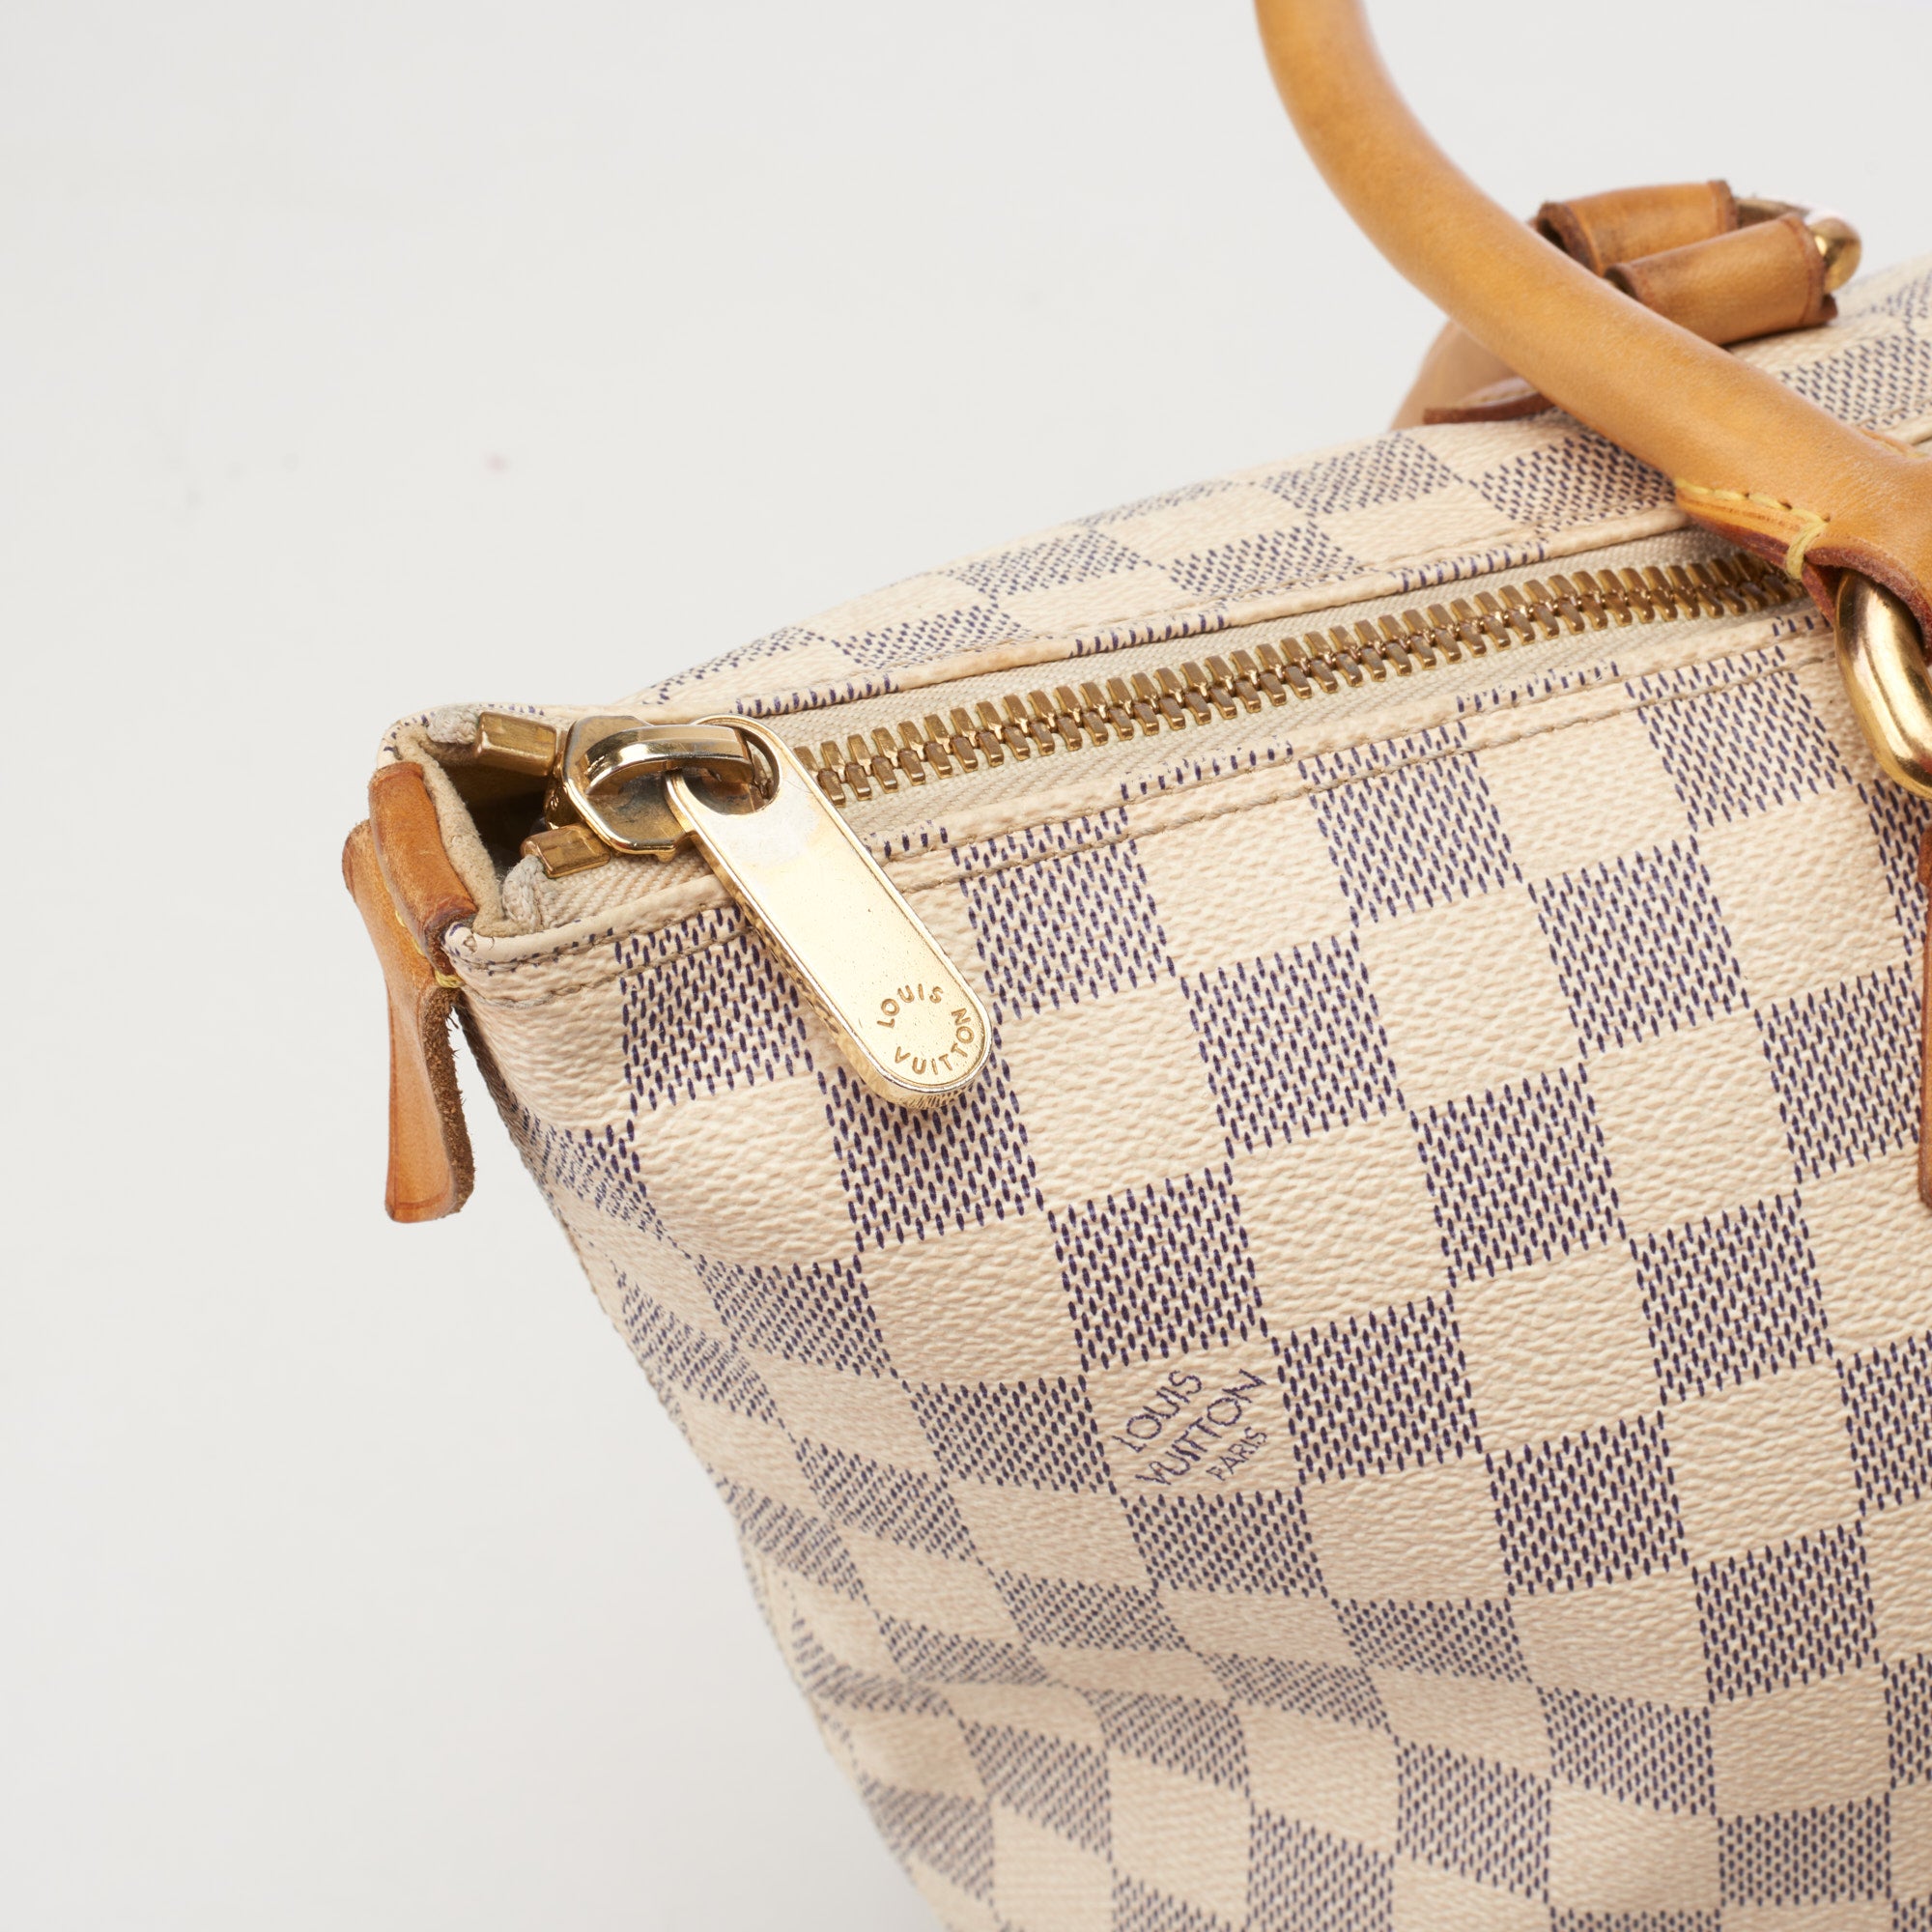 Pre-Owned Louis Vuitton Neverfull Damier Azur MM Tote Bag - Excellent  Condition 